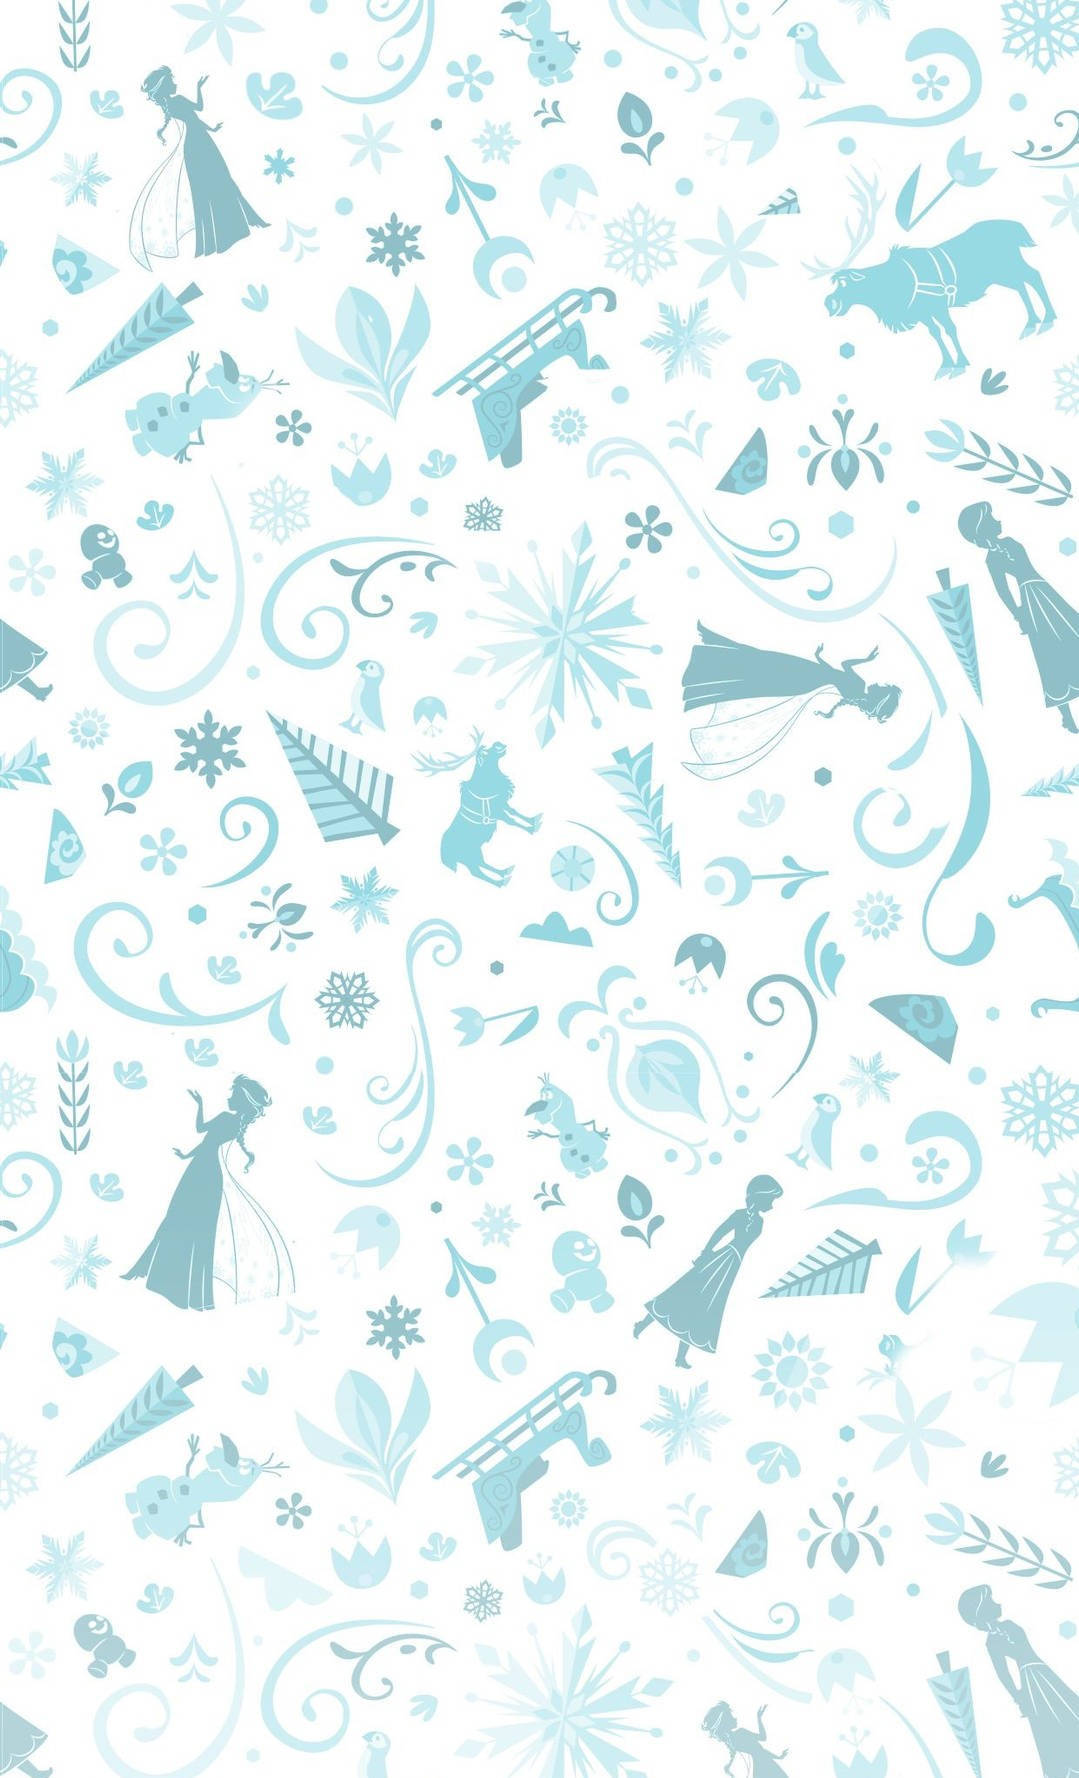 Add some Magic to Your Life with this Disney Pattern Wallpaper